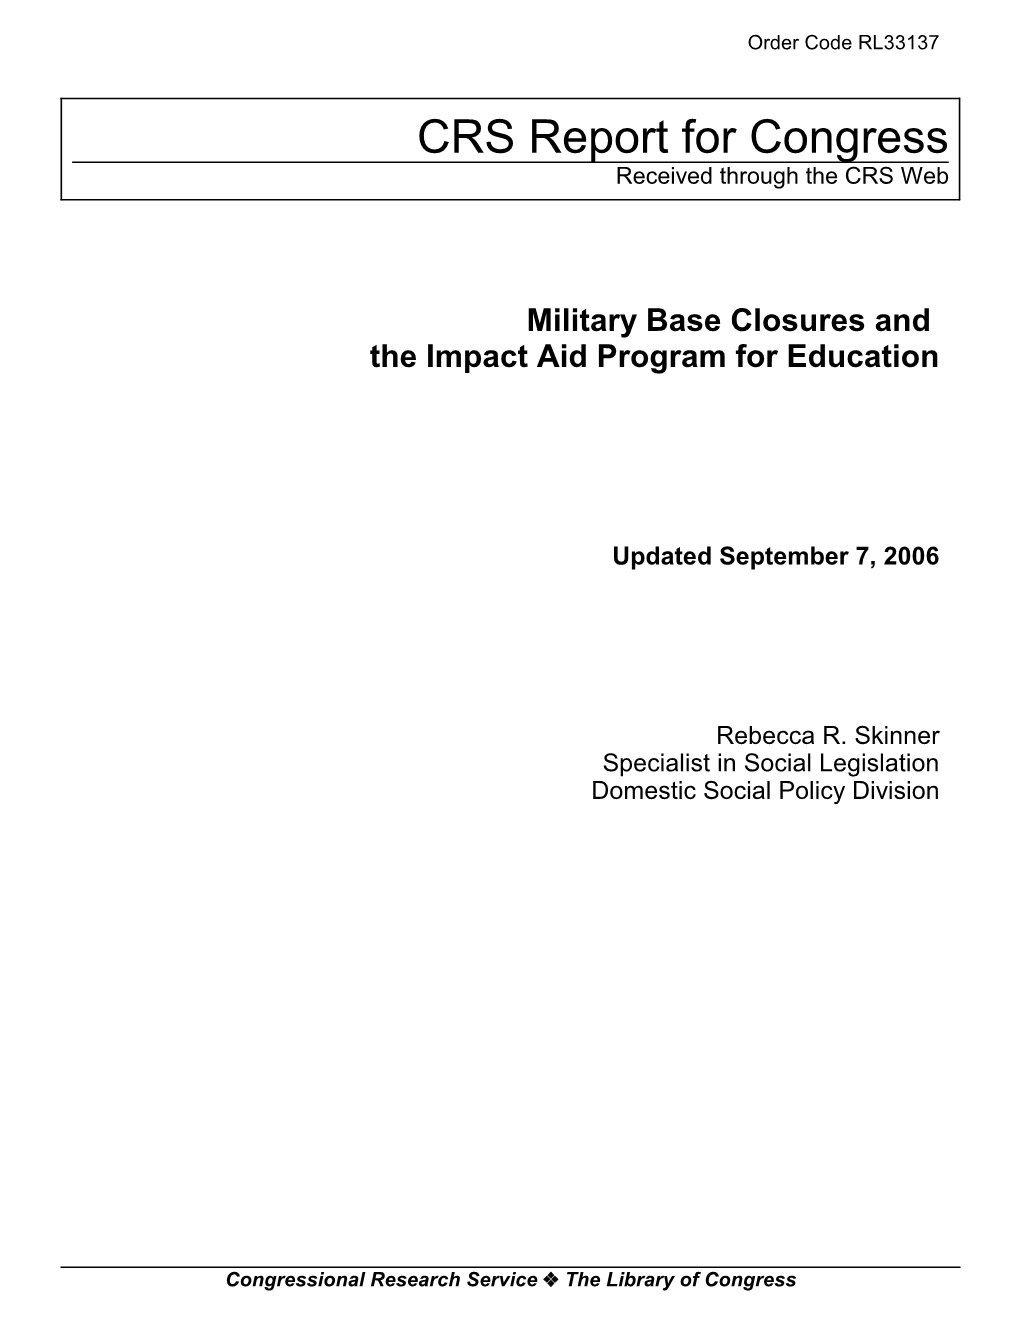 Military Base Closures and the Impact Aid Program for Education